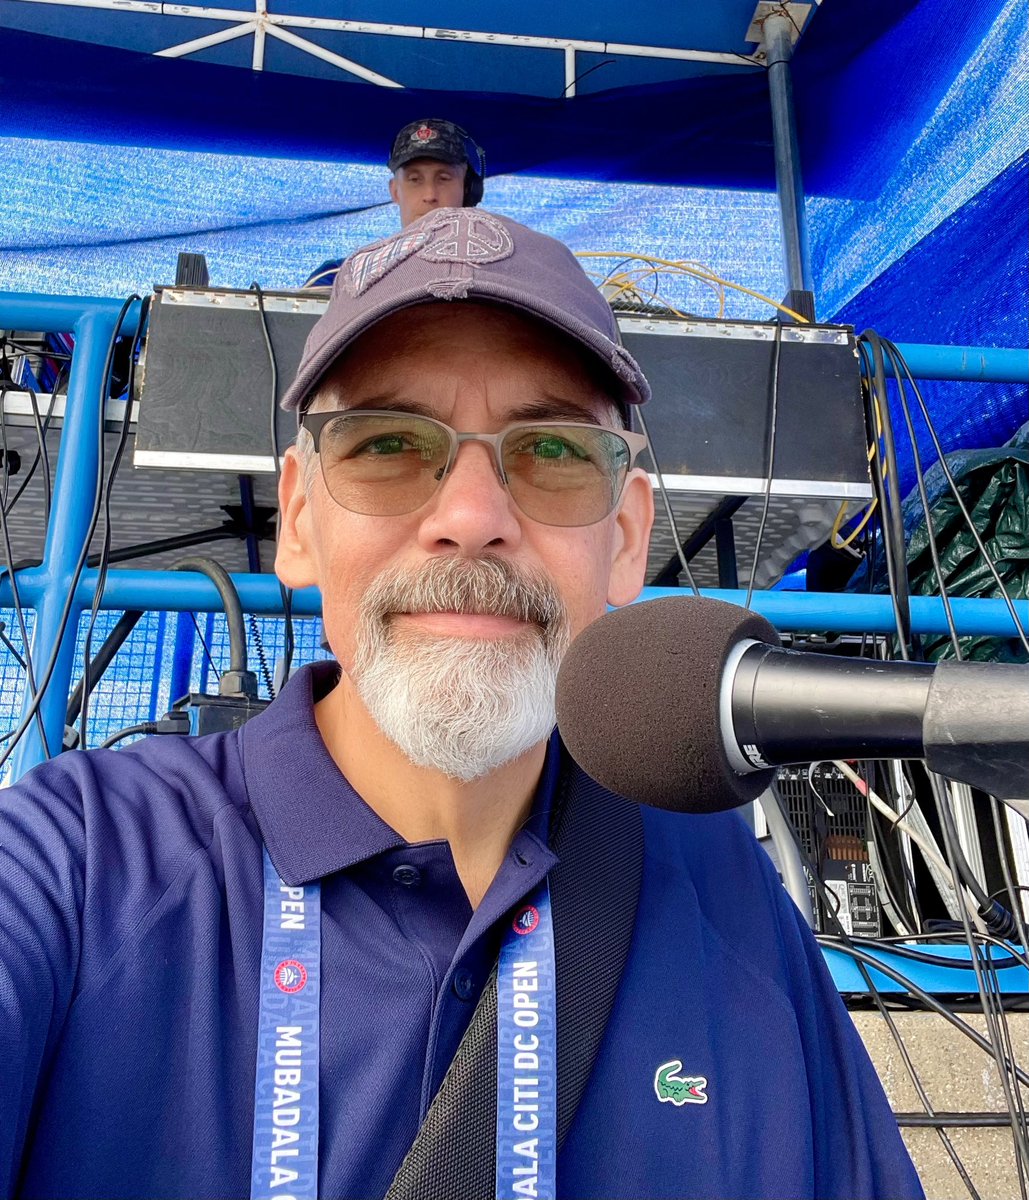 Back in the saddle behind the mic at the @mubadalacitidc DC Open! It’s a beautiful day for All-Star ATP/WTA 500 Tennis! Come out and grab some EPIC MATCHES! #CitiOpen